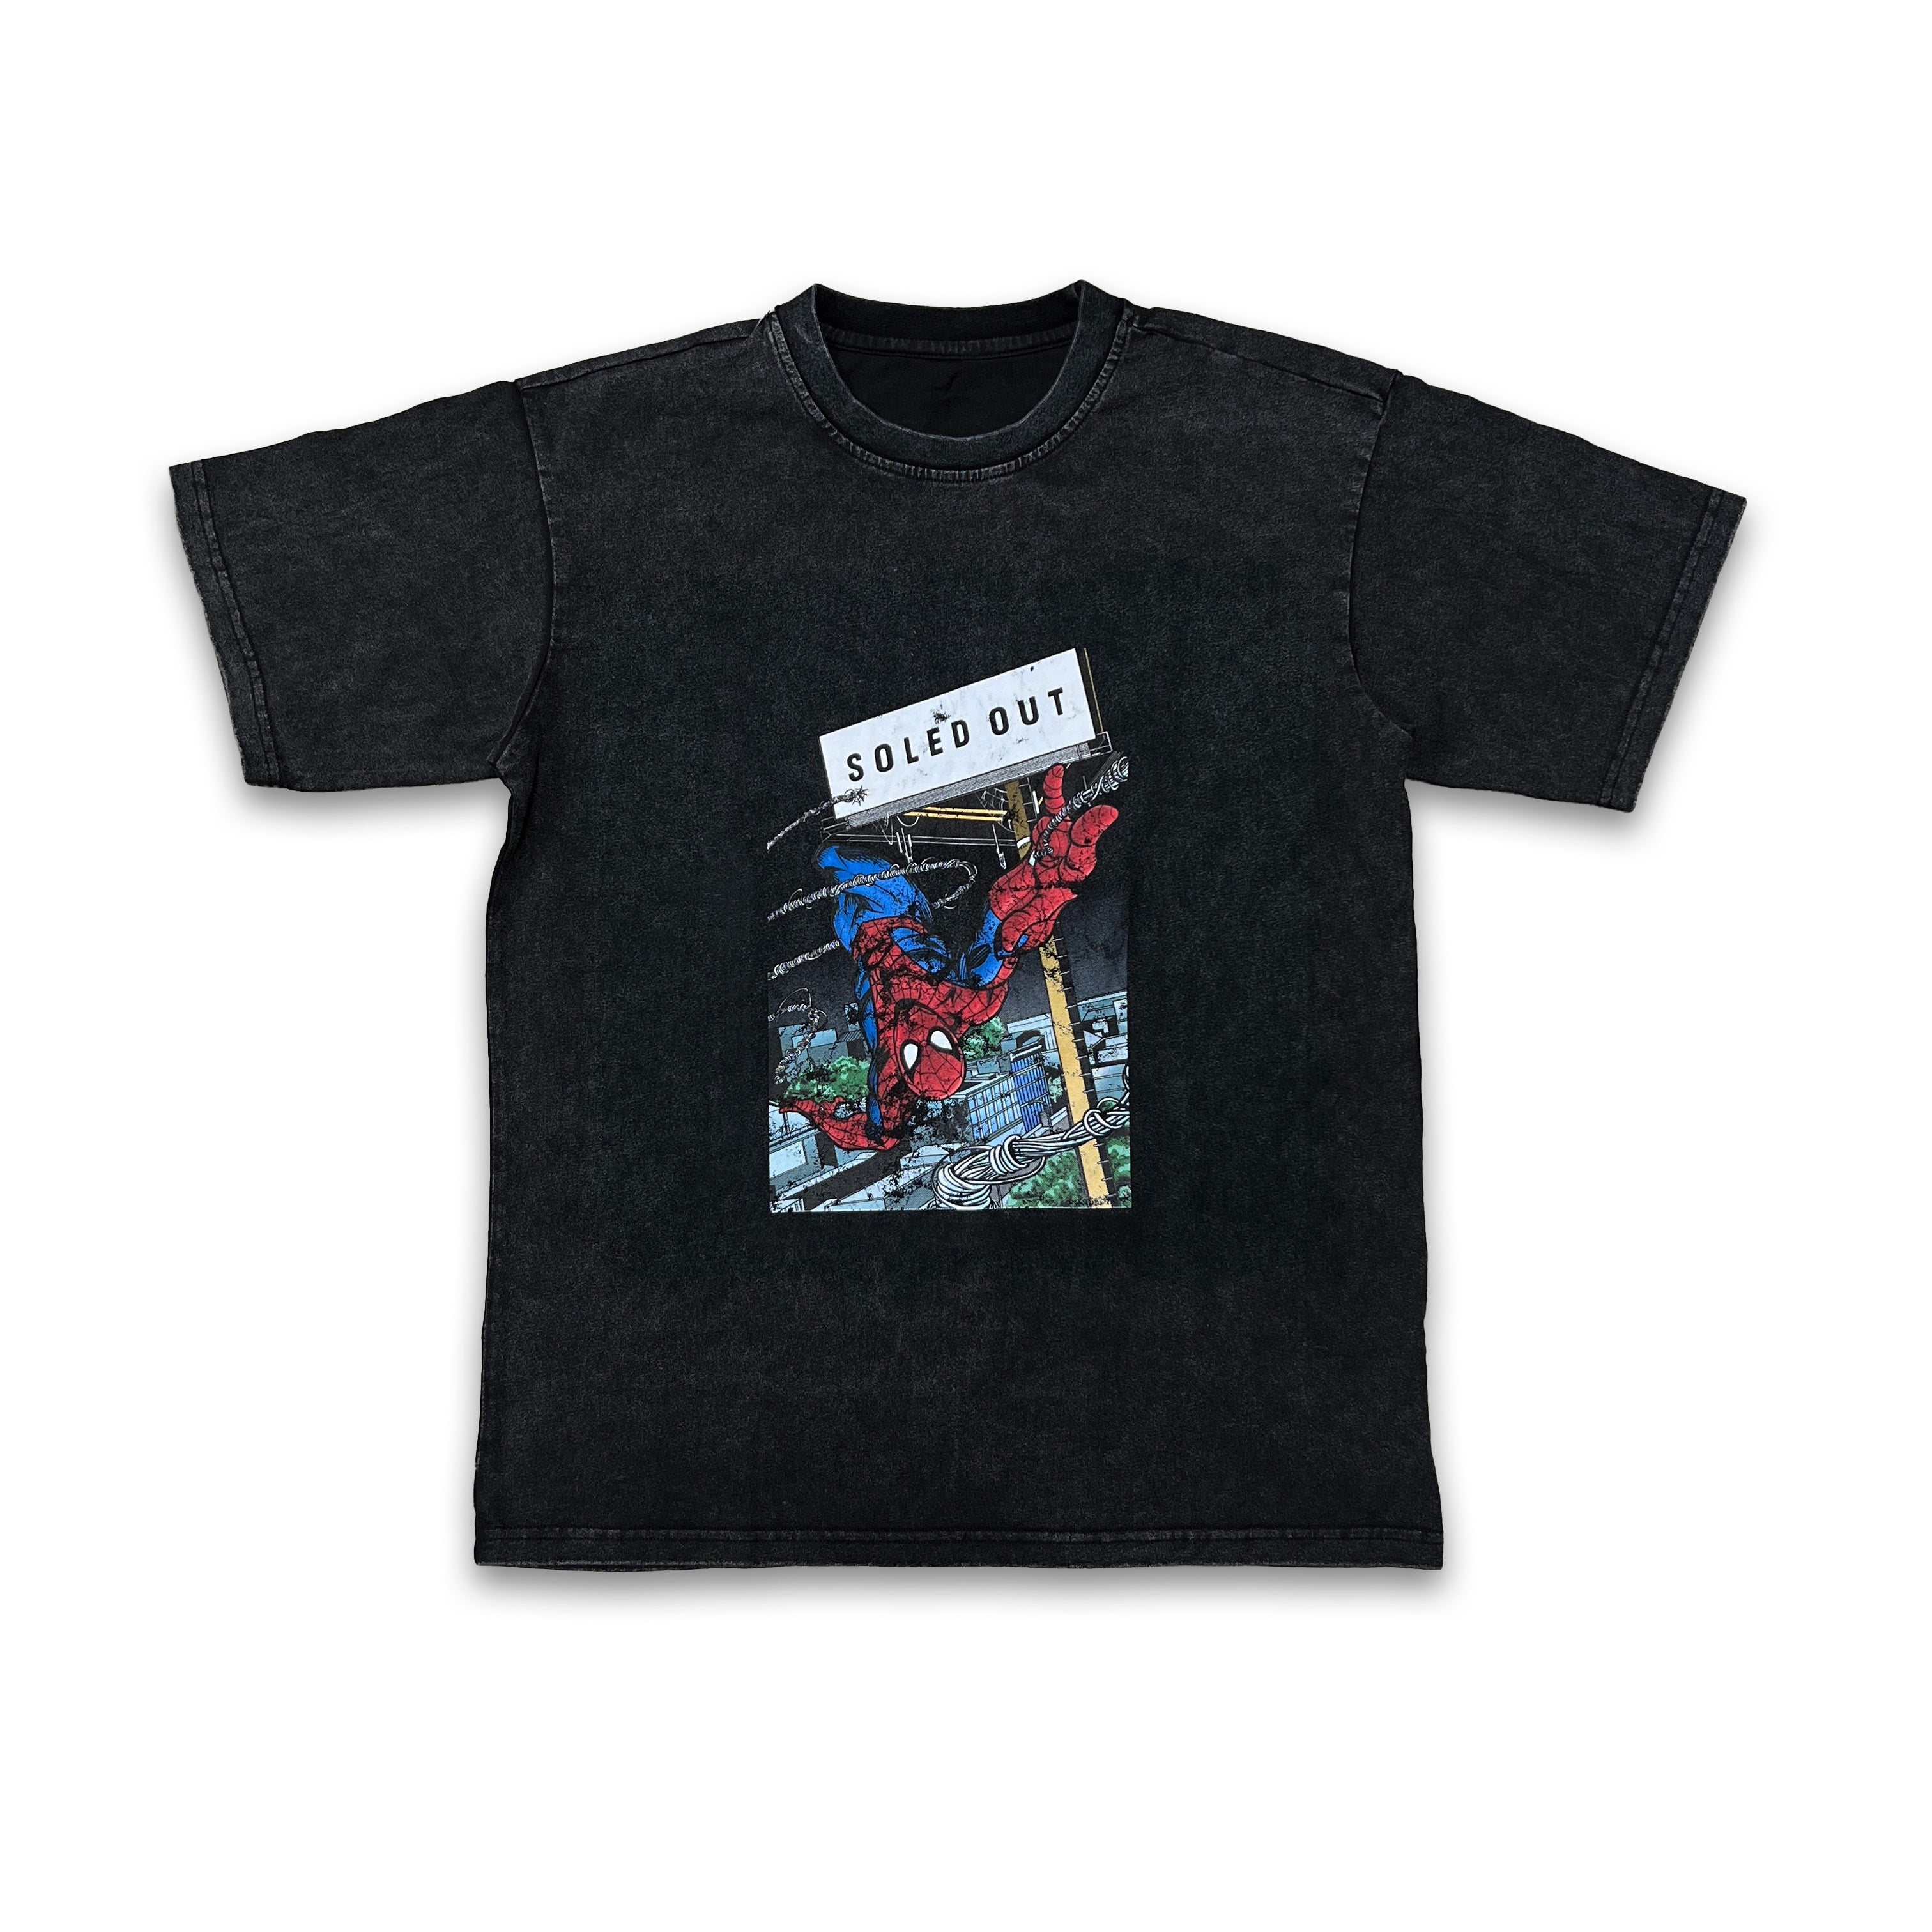 Soled Out T-Shirt "SPIDERMAN" Black New Size S